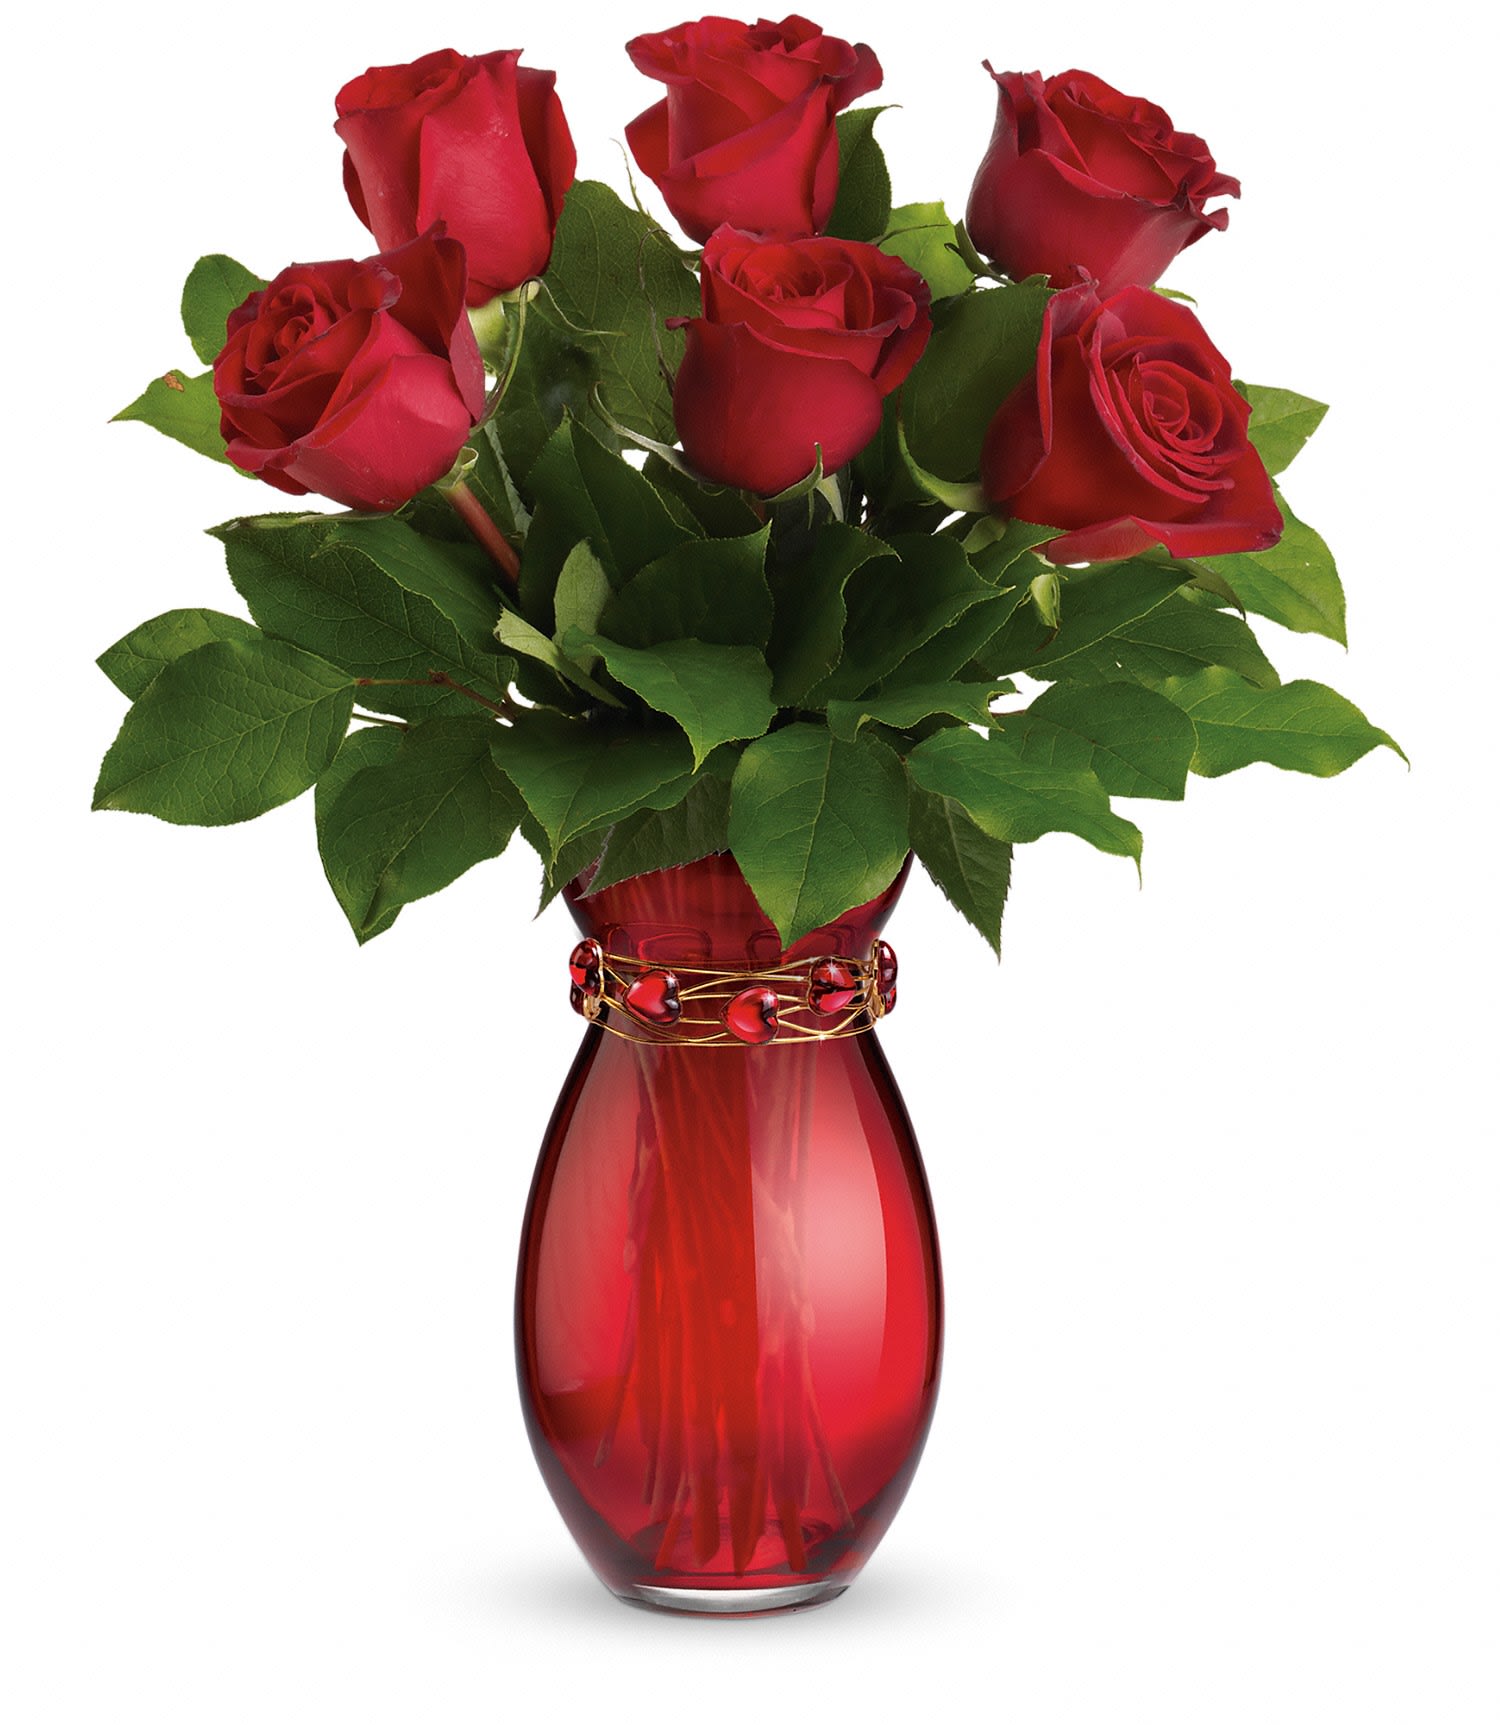 Teleflora's Sweethearts Forever Bouquet - Red roses hand-delivered in a hand-blown red glass vase with a striking bracelet are the recipe for romance! Sweep your sweetheart off her feet with this breathtaking 3-in-1 gift - a special Valentine's Day delivery she'll never forget. 